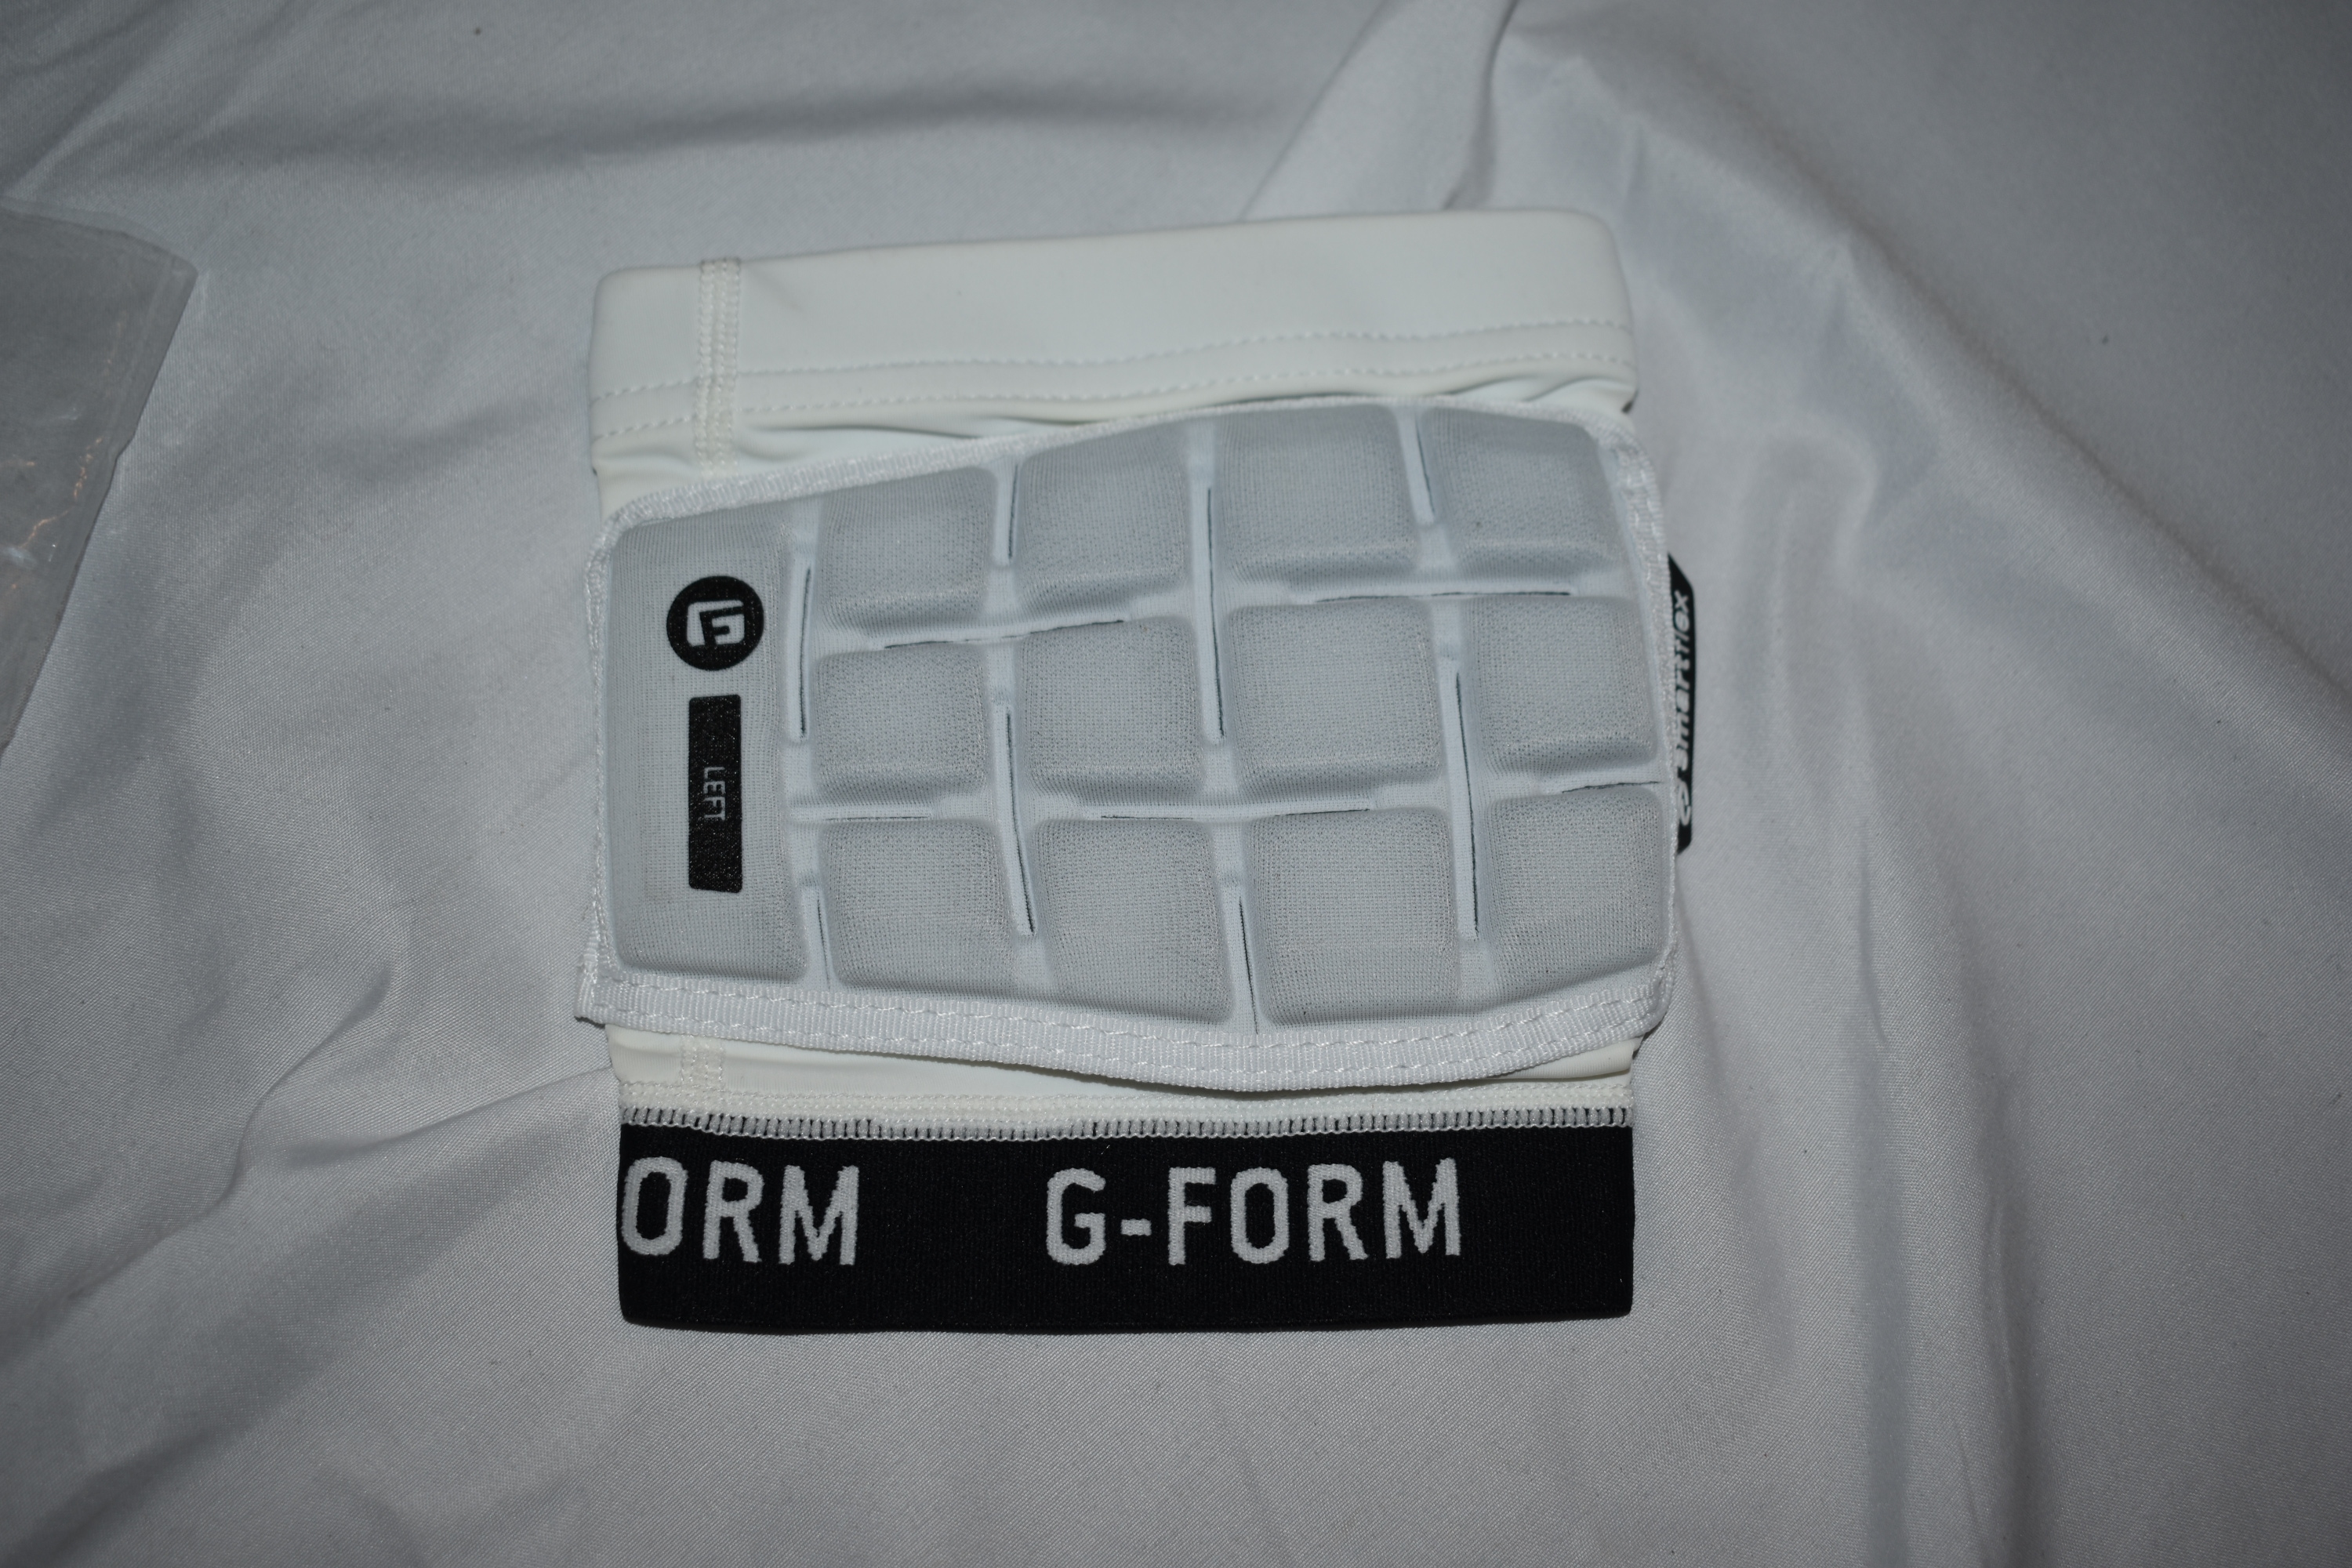 NEW - G-Form Protective Pro Elbow Pad, Hardens on Impact, White, Adult